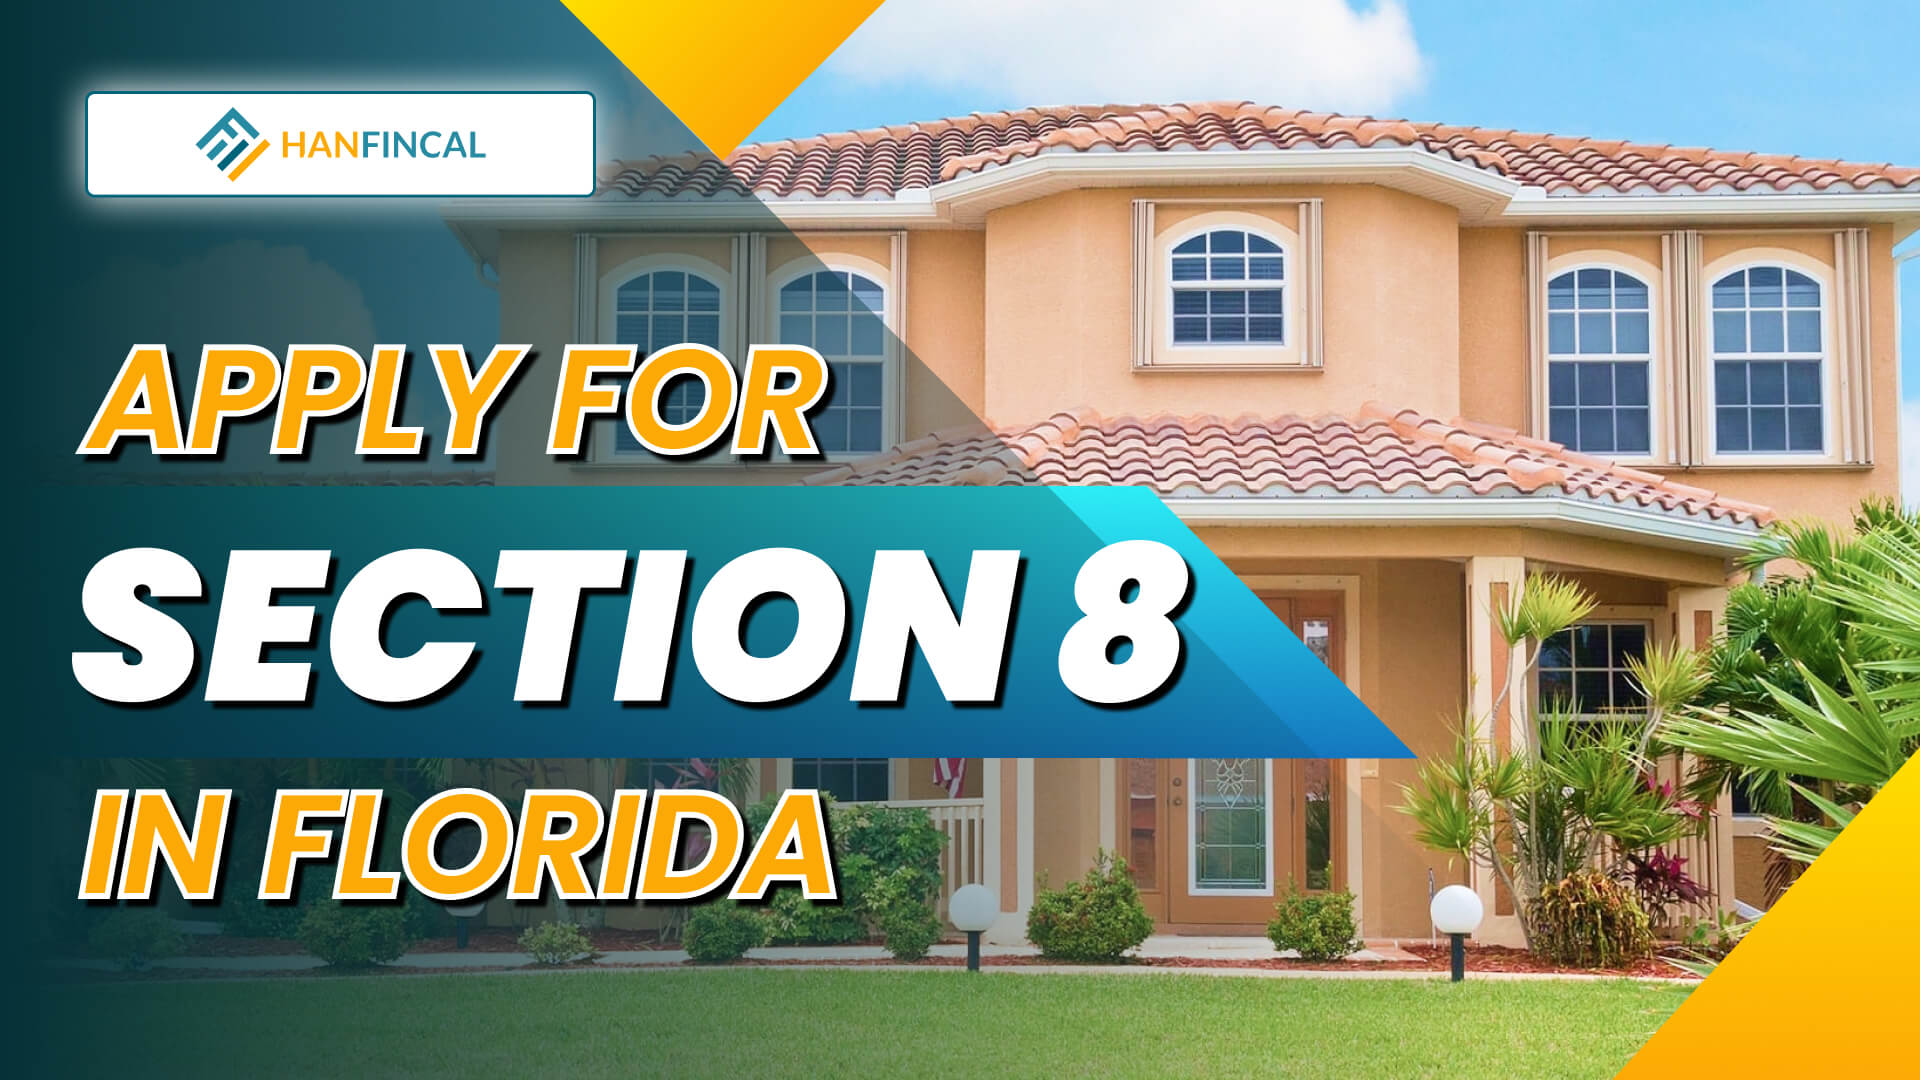 how-to-qualify-apply-for-section-8-in-florida-hanfincal